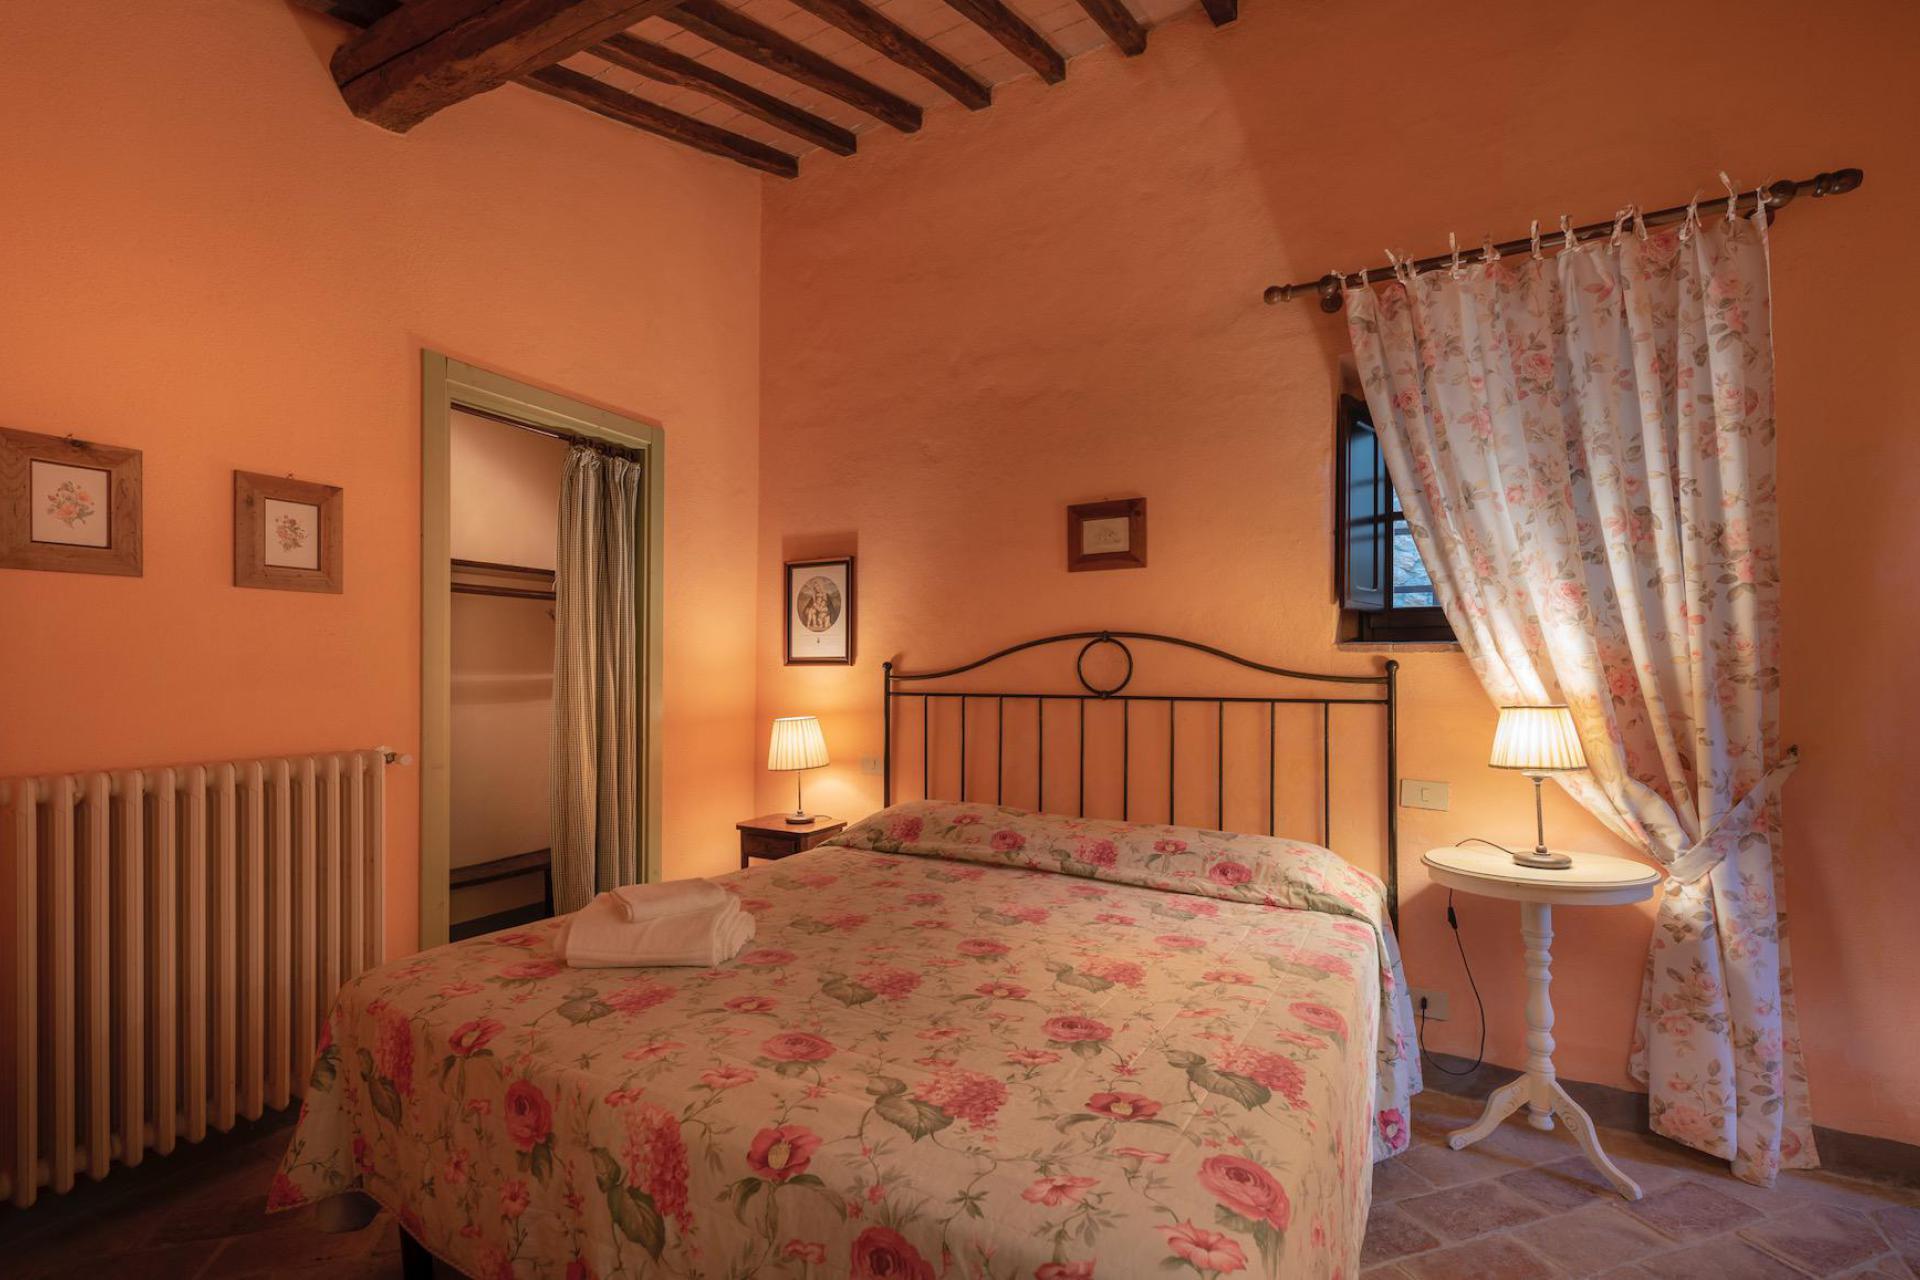 Agriturismo Tuscany Agriturismo - Farmhouse for lovers of peace and comfort in Tuscany